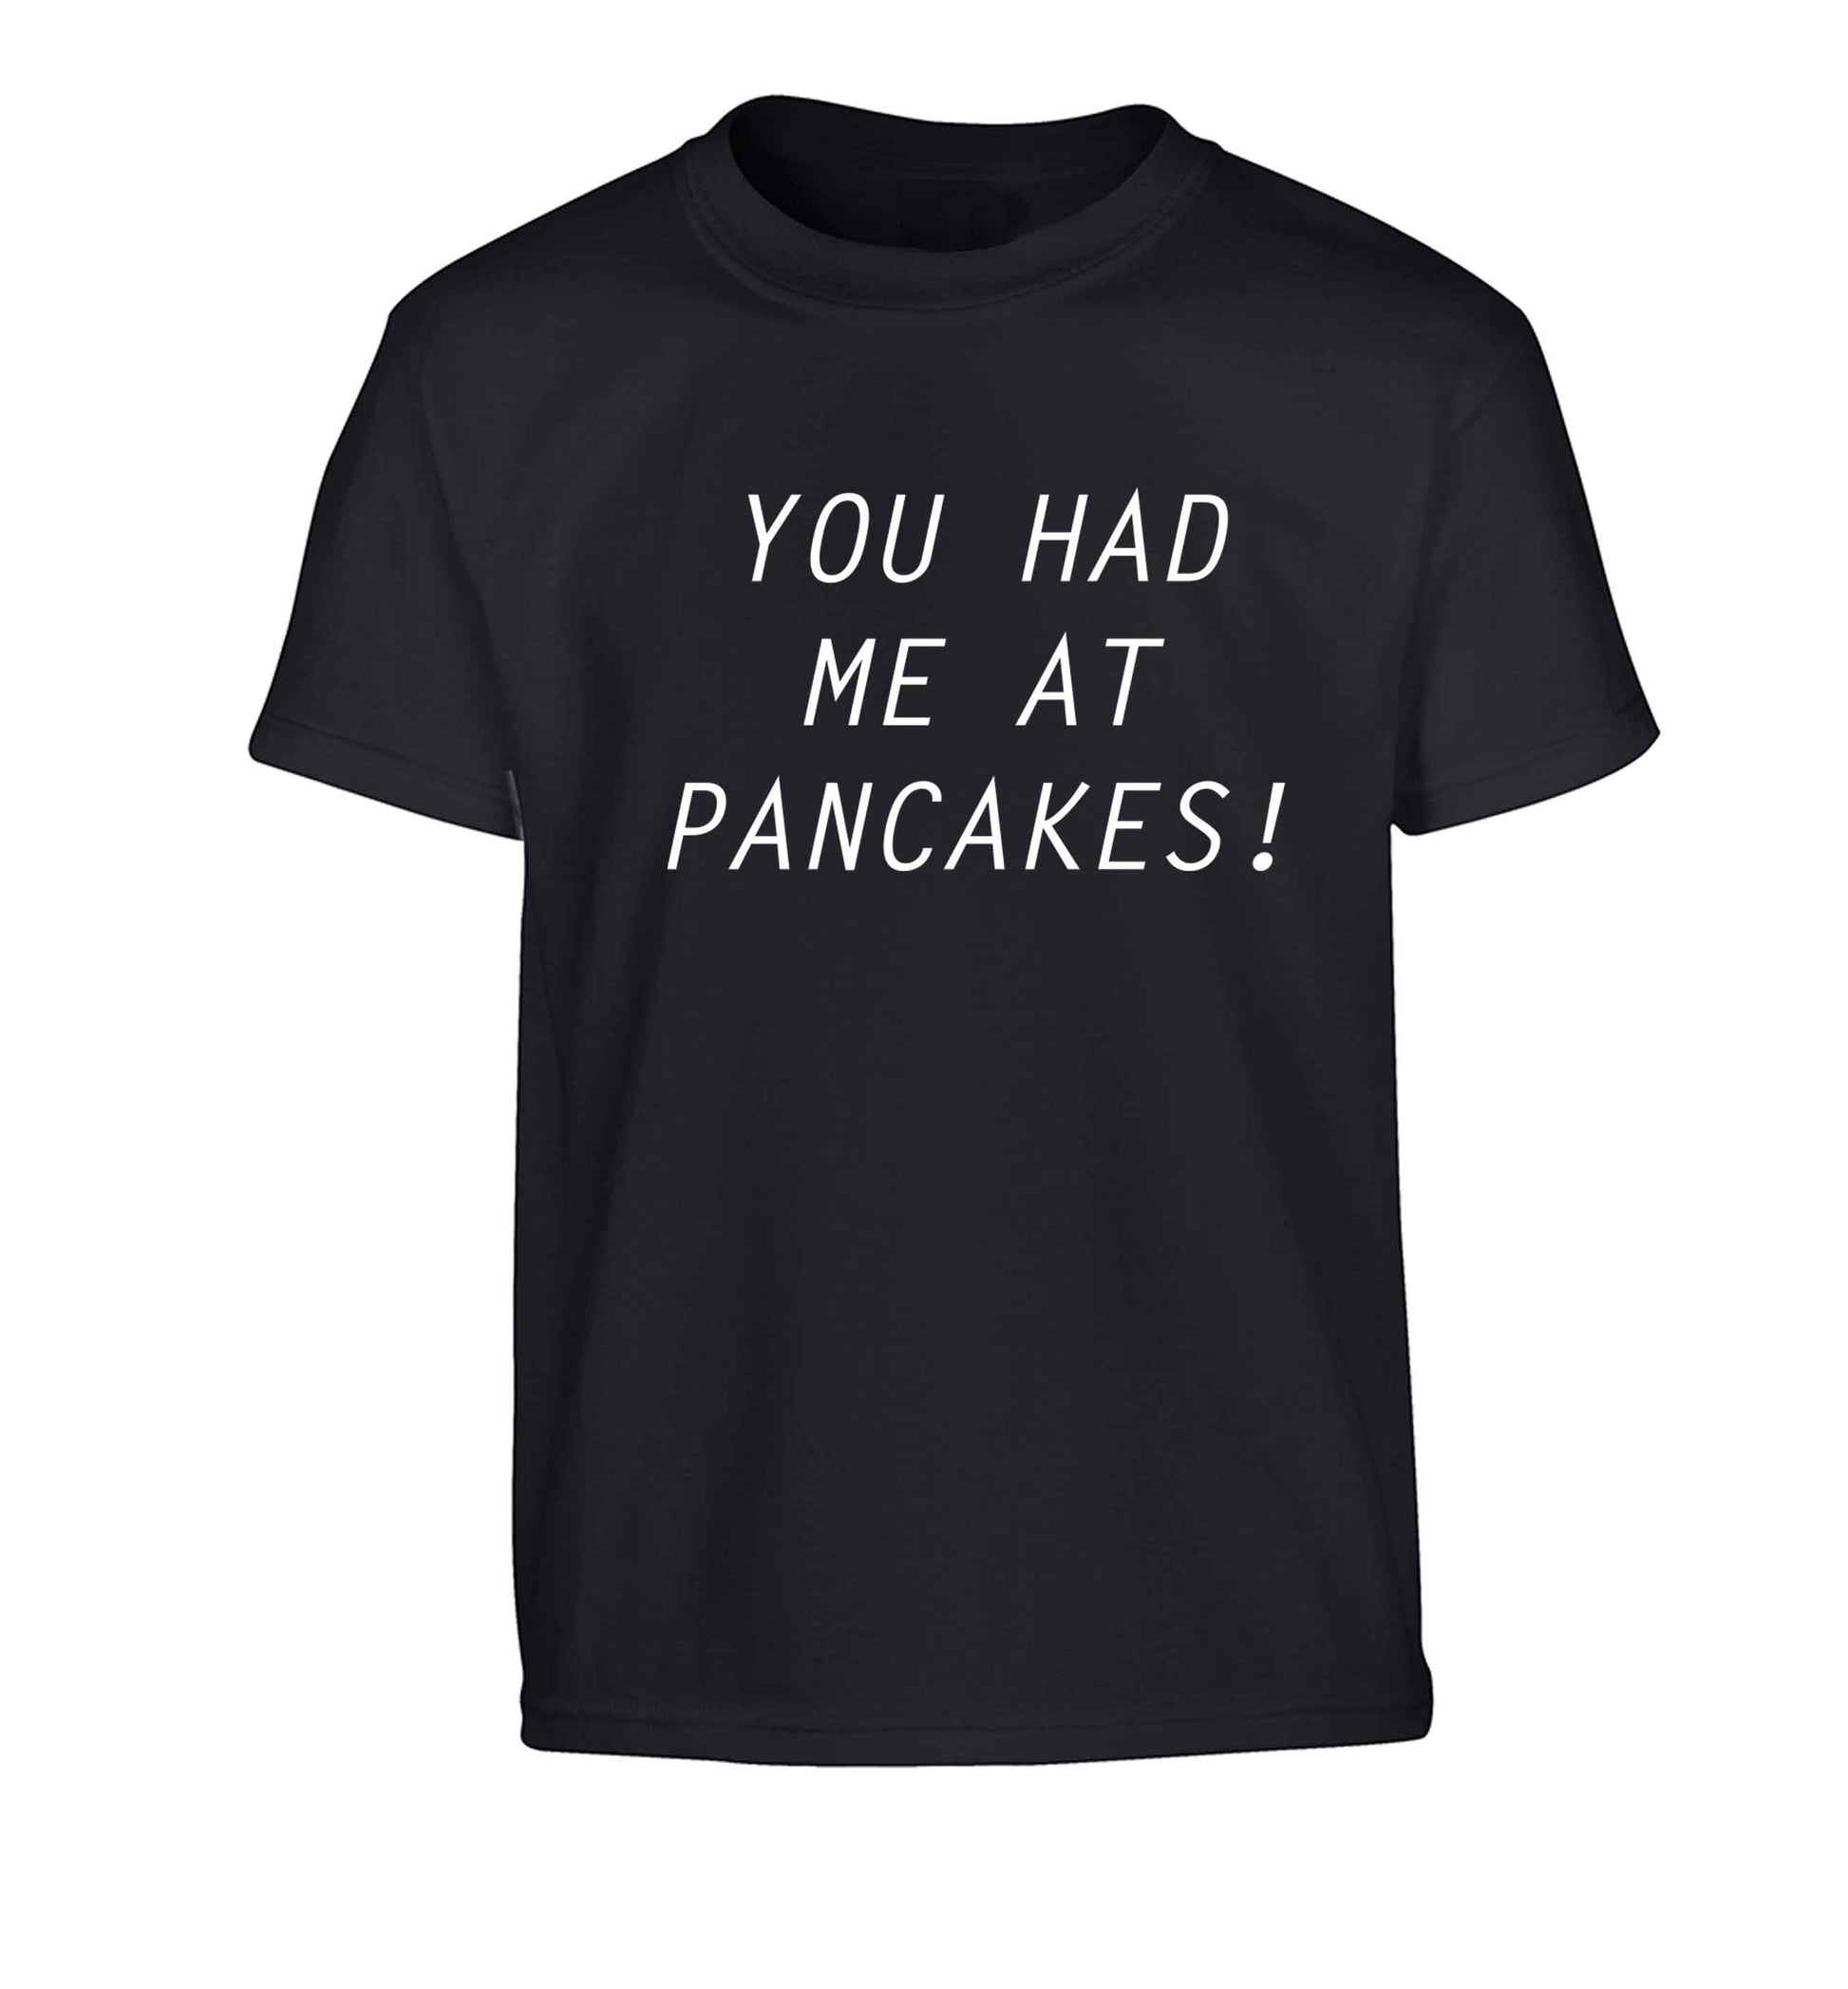 You had me at pancakes Children's black Tshirt 12-13 Years